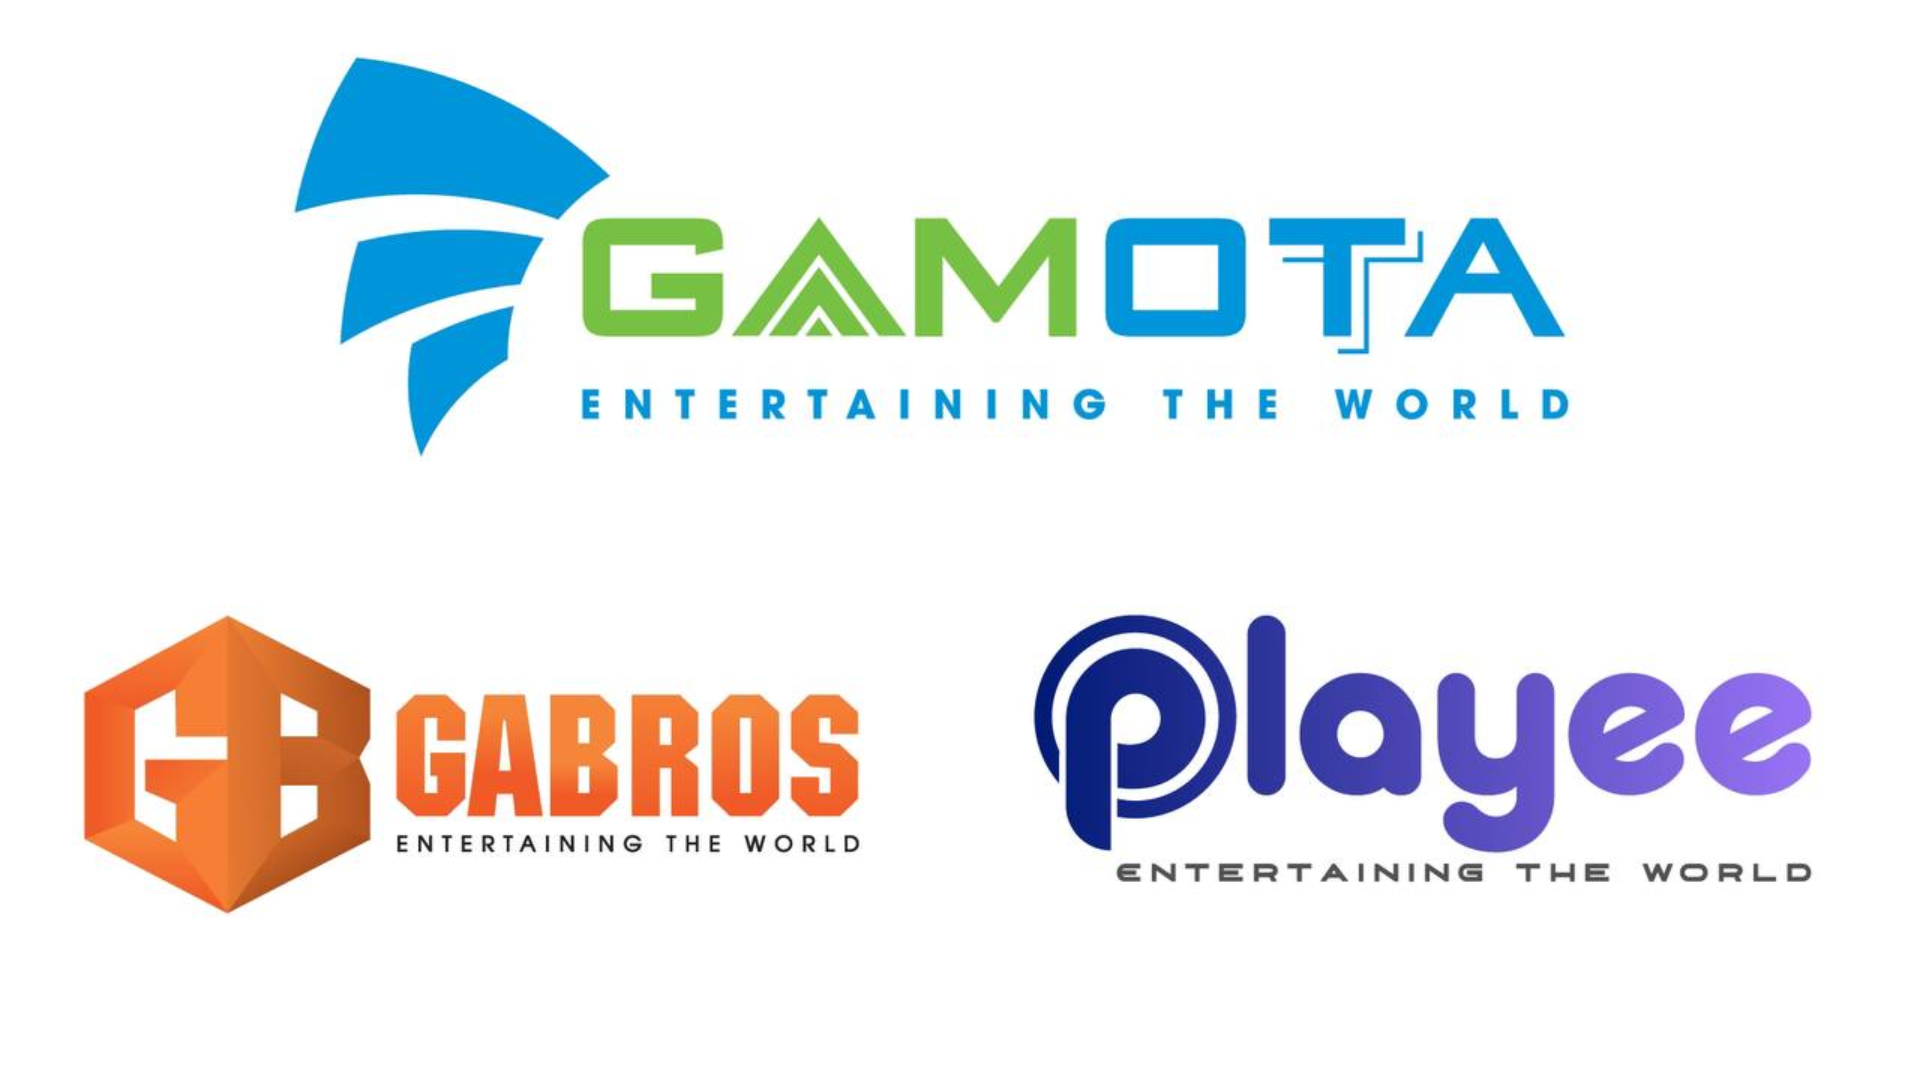 Playee & Gabros – The Ultimate Gaming Ecosystem